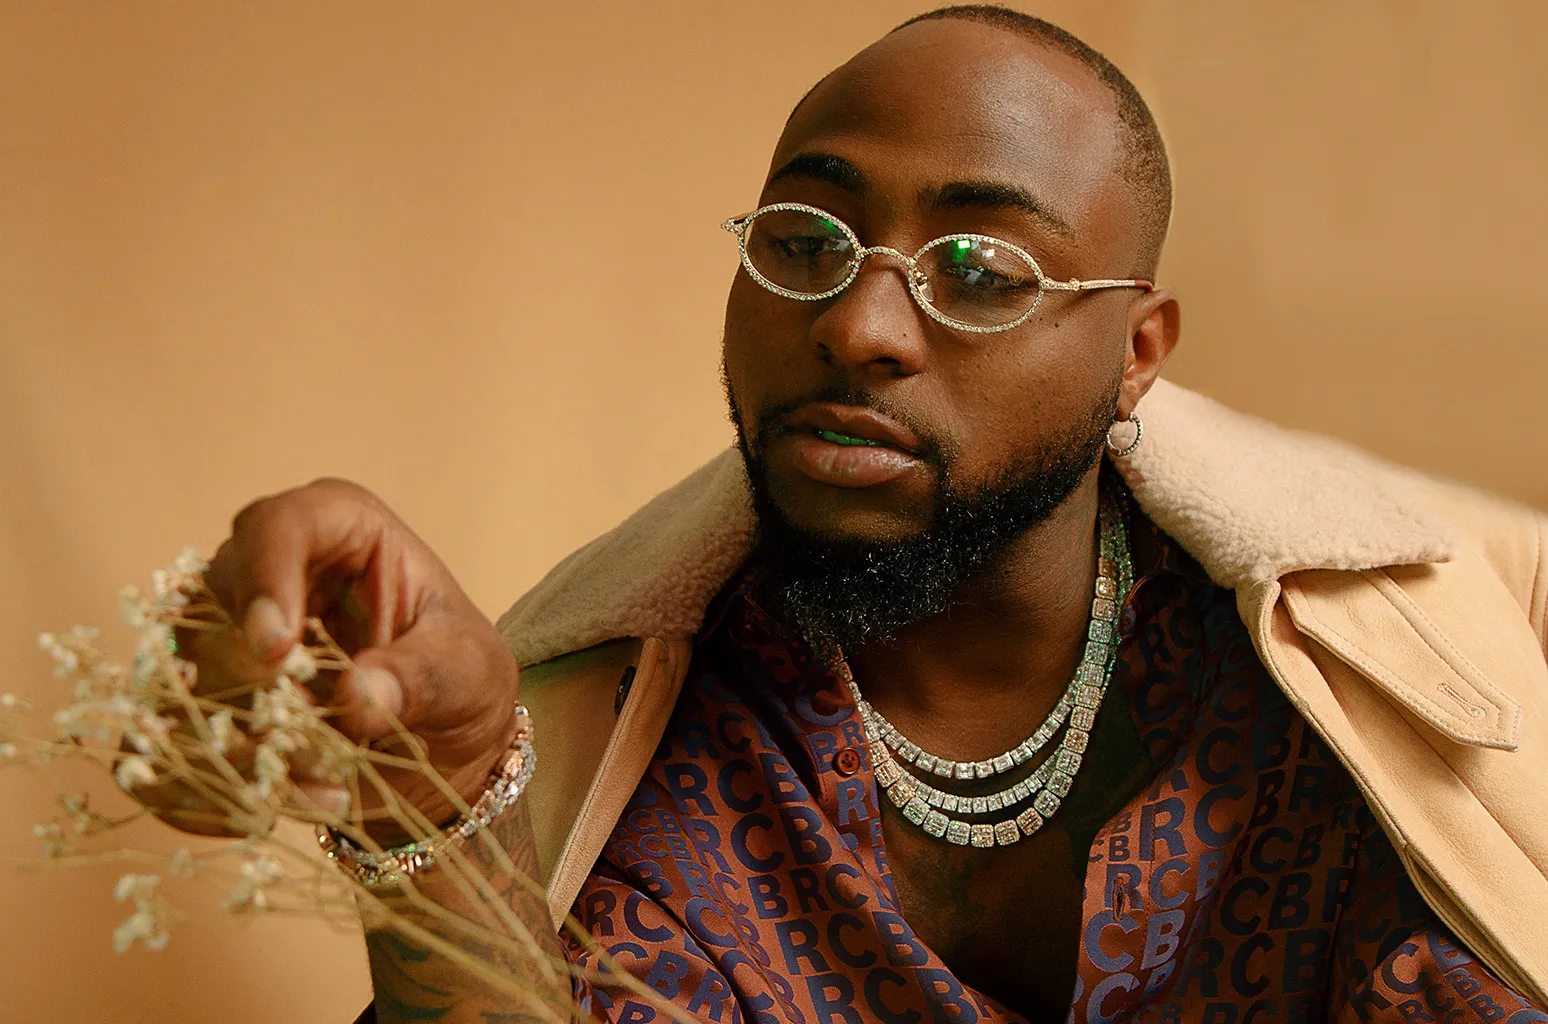 Davido supports Kanye West in Adidas beef, asks him to join Puma